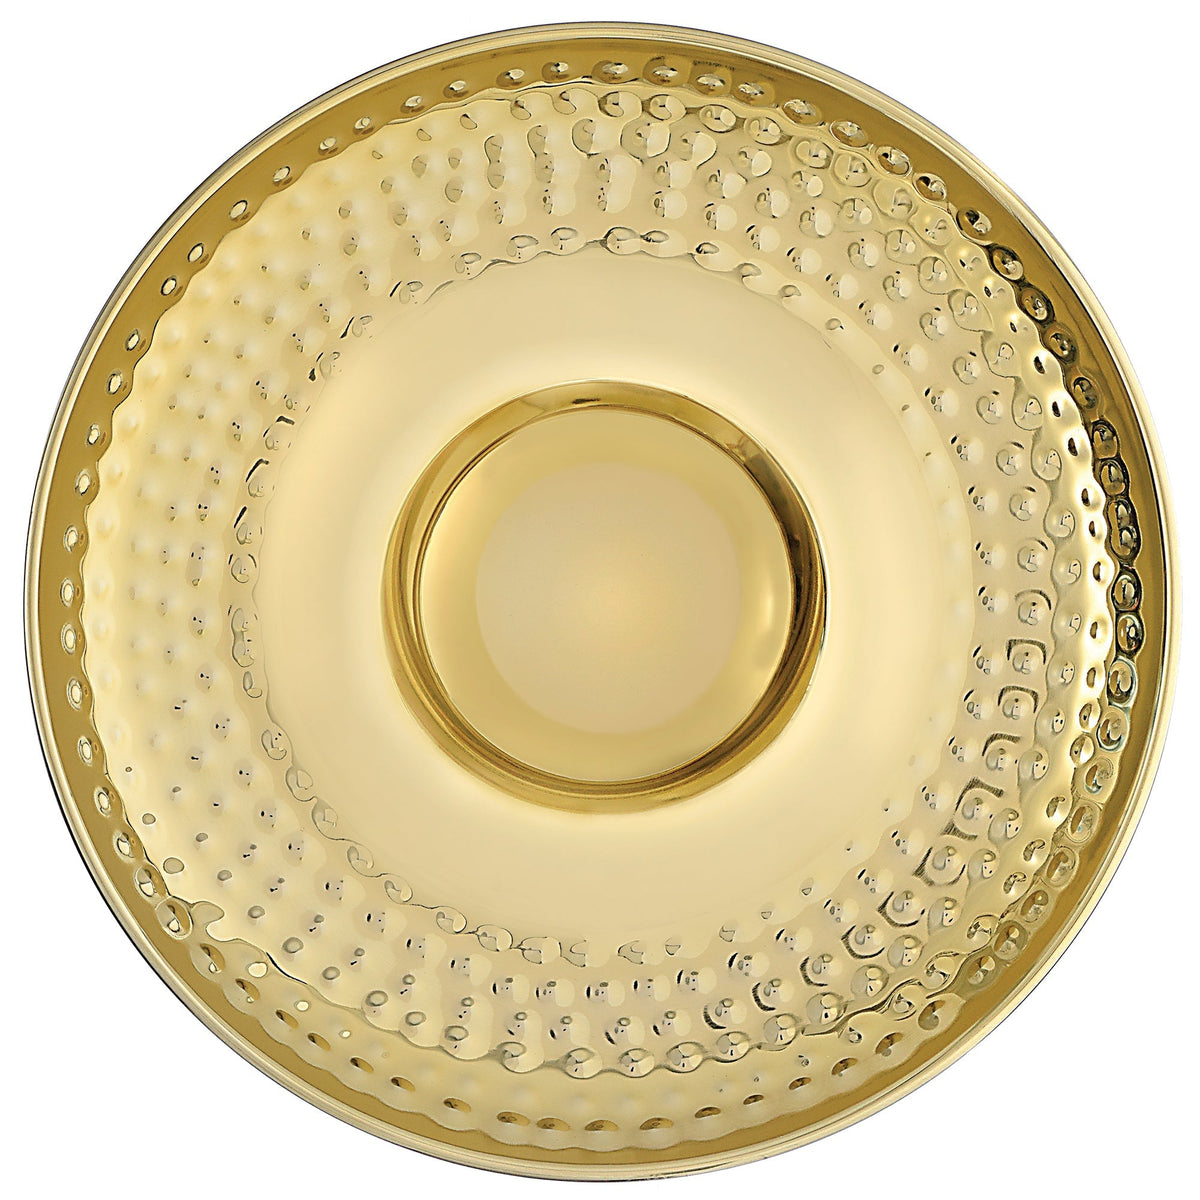 AMSCAN CA Disposable-Plasticware Gold Stainless Steel Chip and Dip Tray, 14 Inches, 1 Count